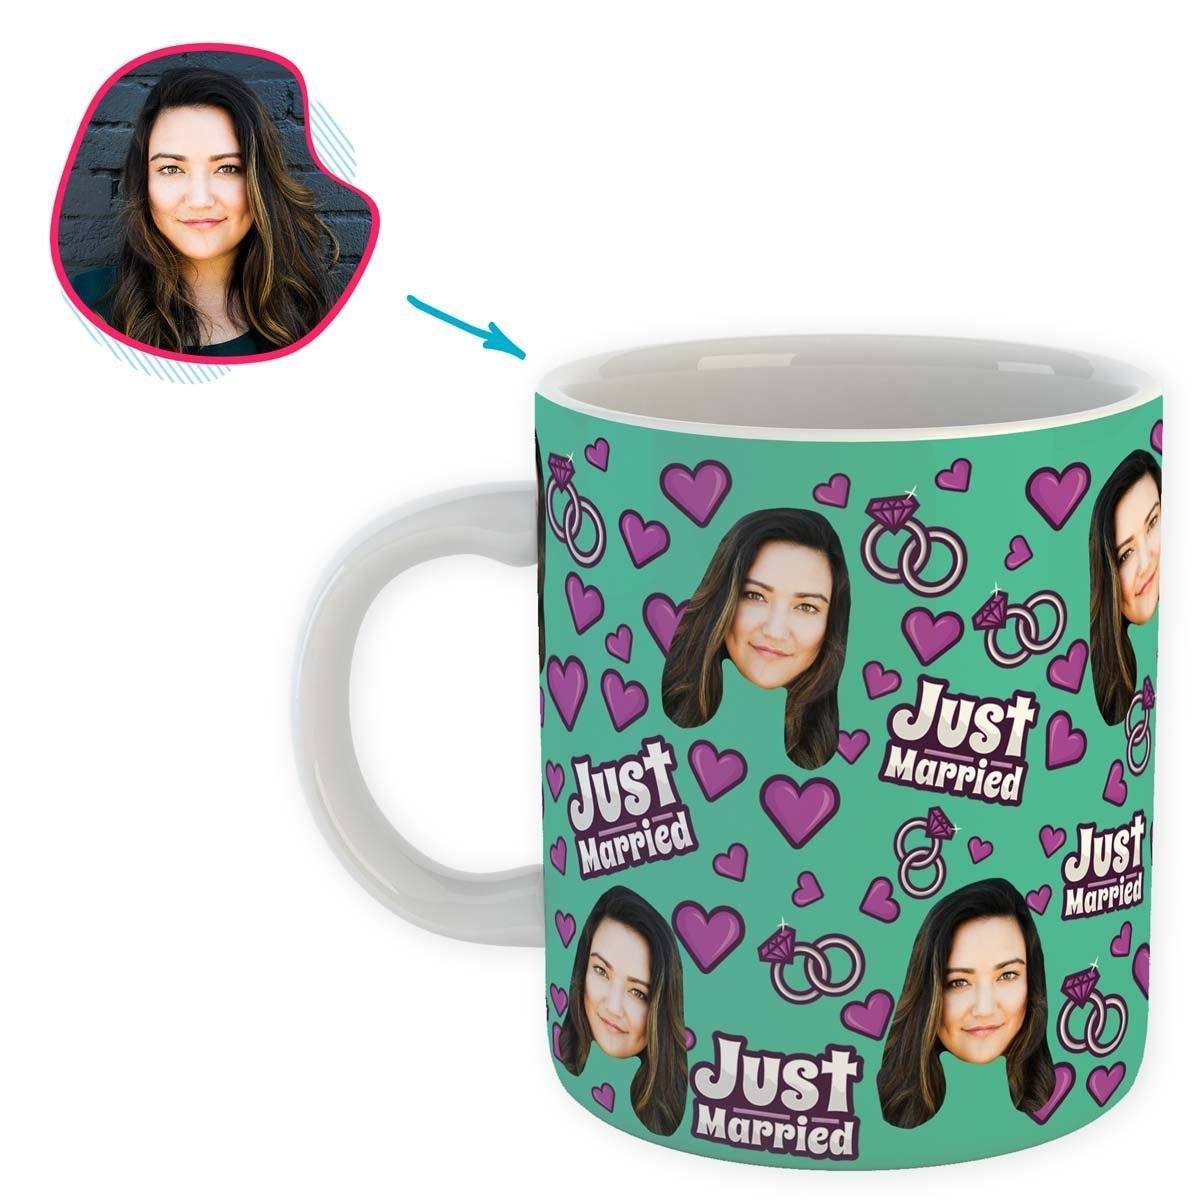 Just Married Personalized Mug